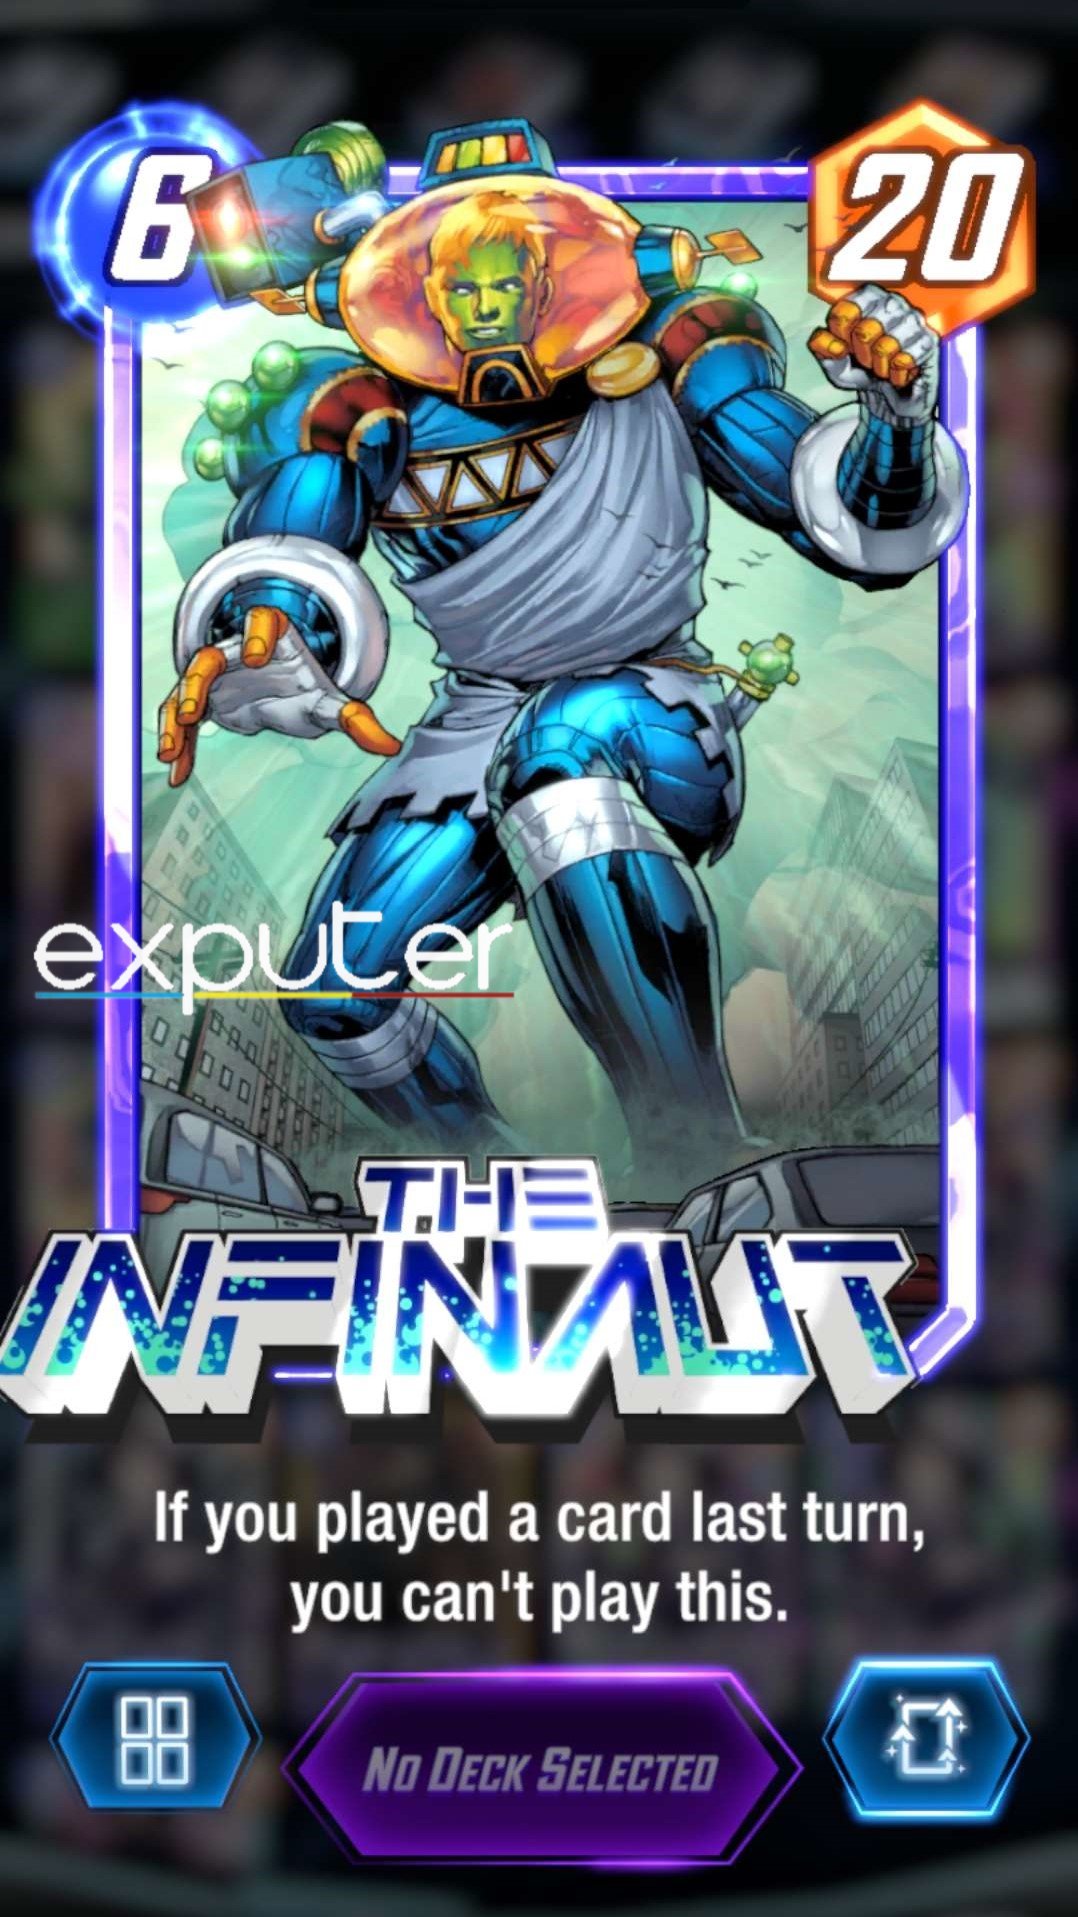 Illustrating The Infinaut, a Pool 2 card that can only be played if no other card was played in the previous round